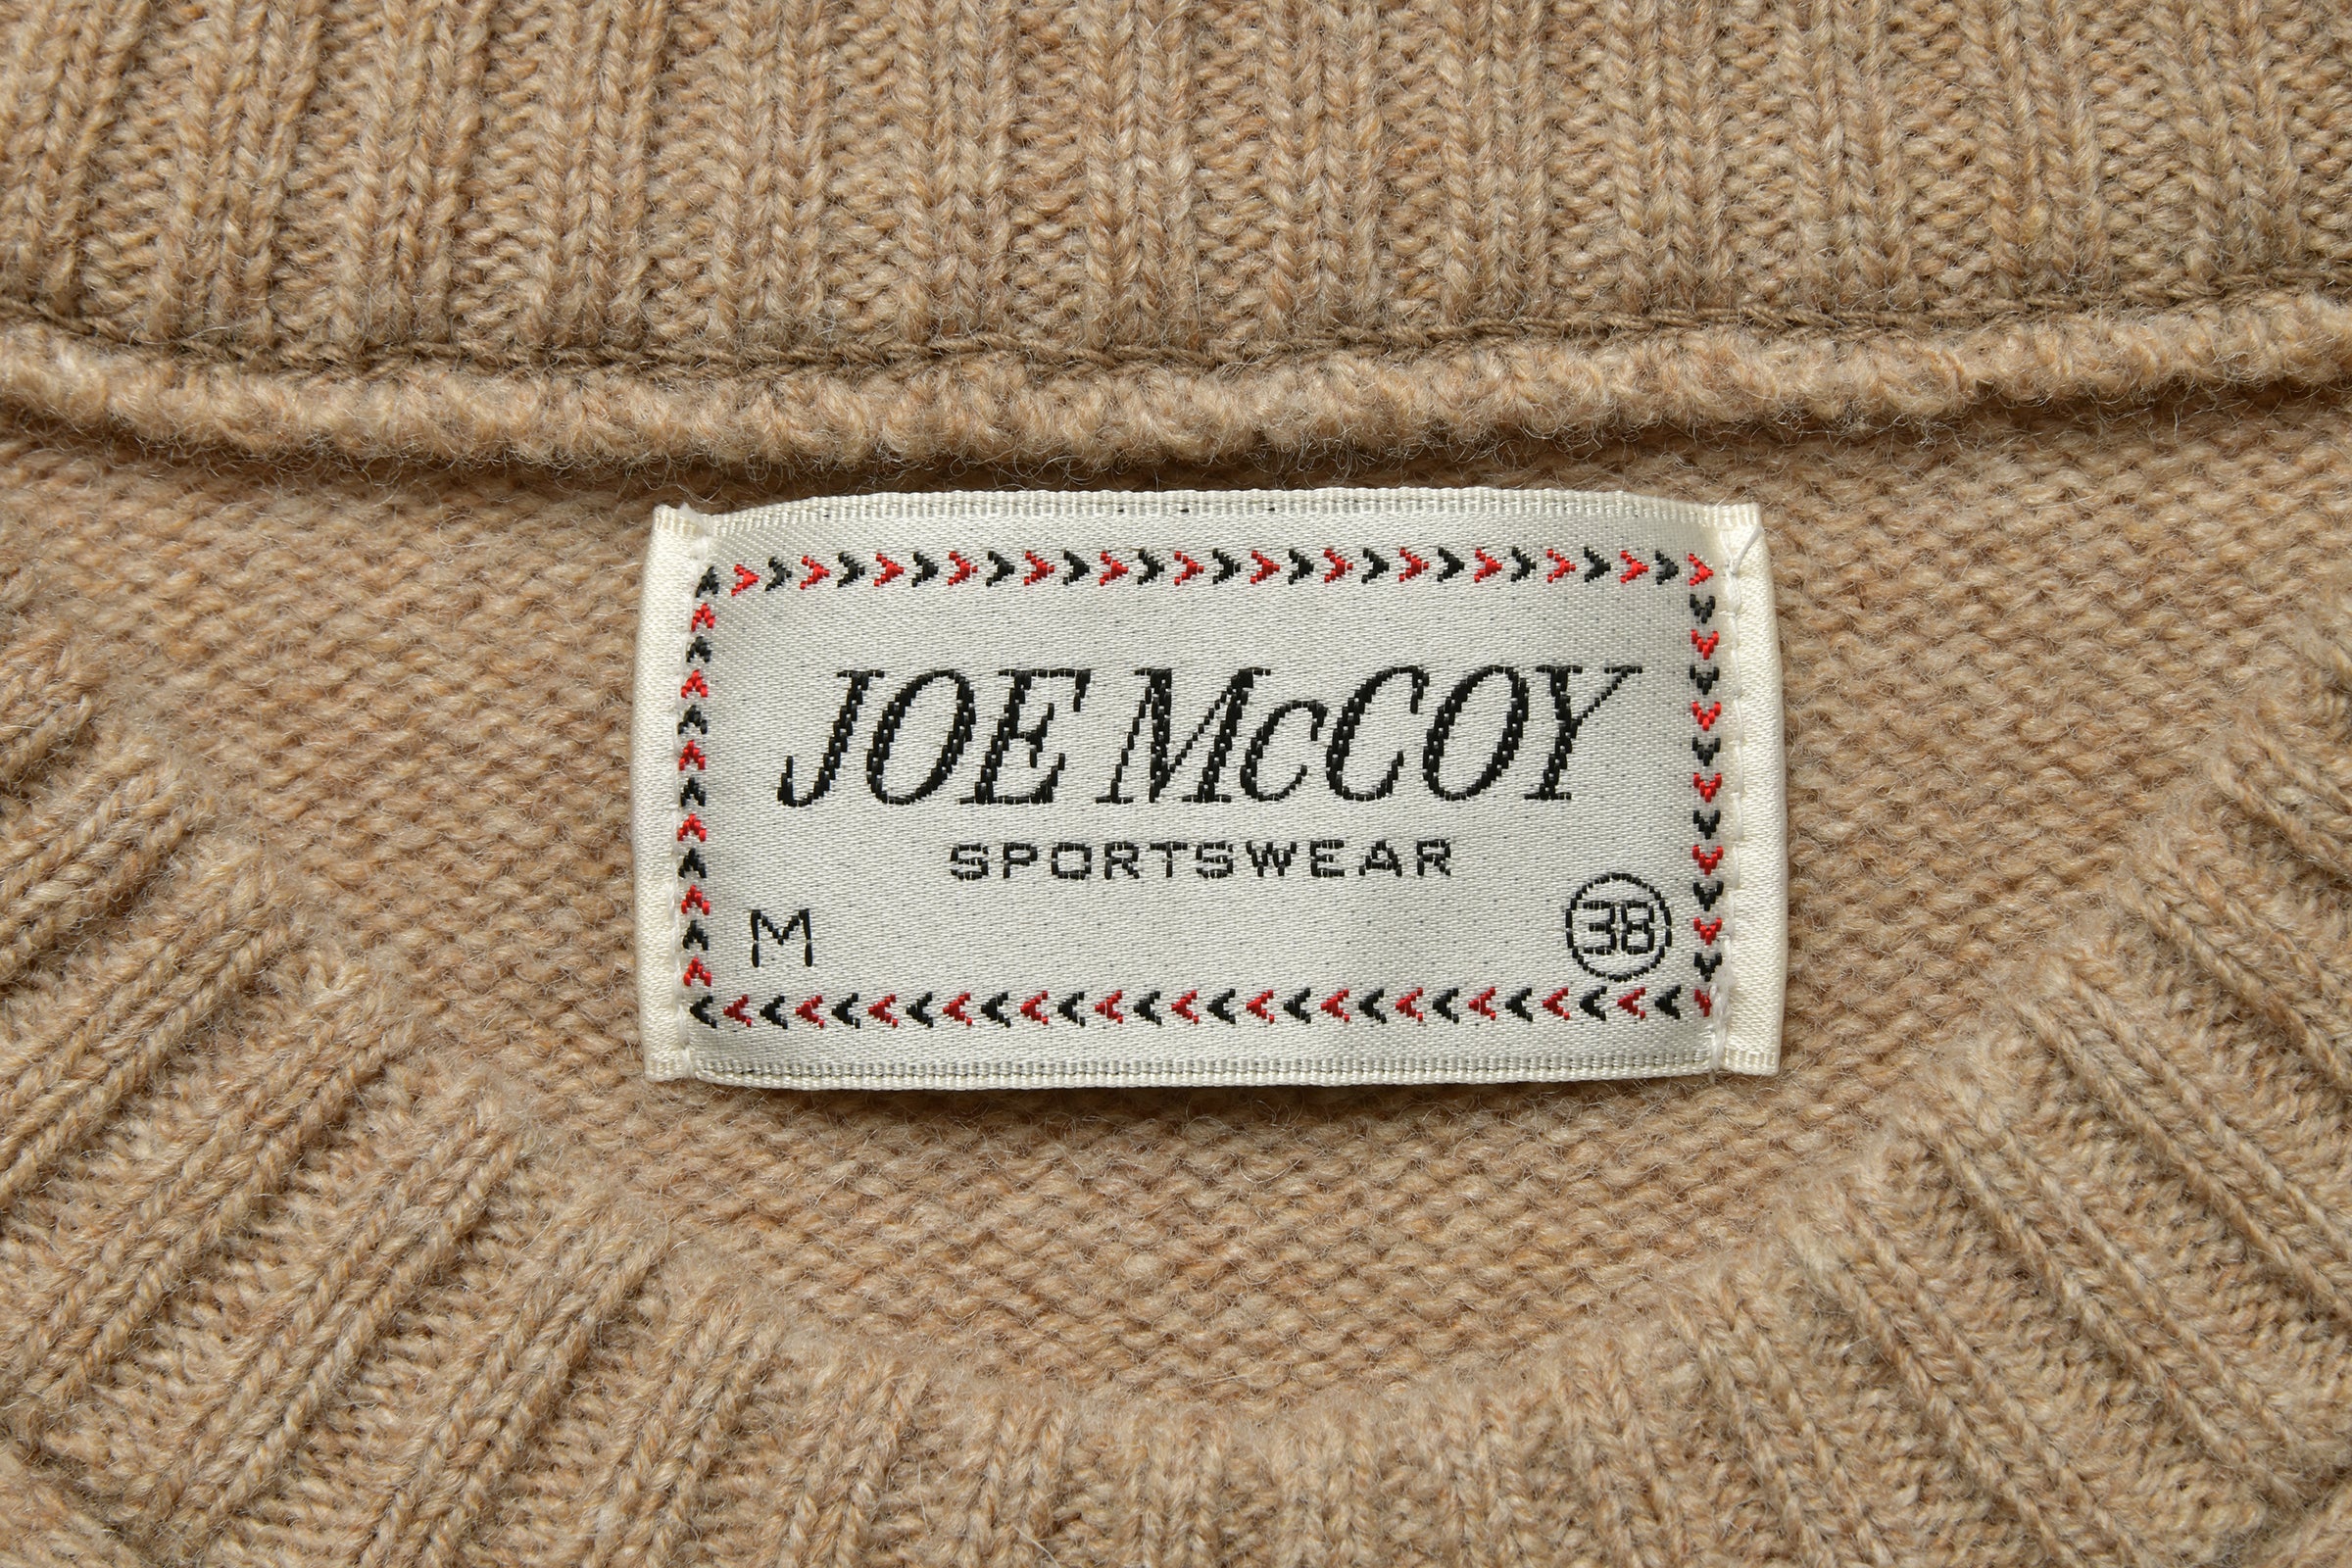 WOOL CREWNECK SWEATER – The Real McCoy's